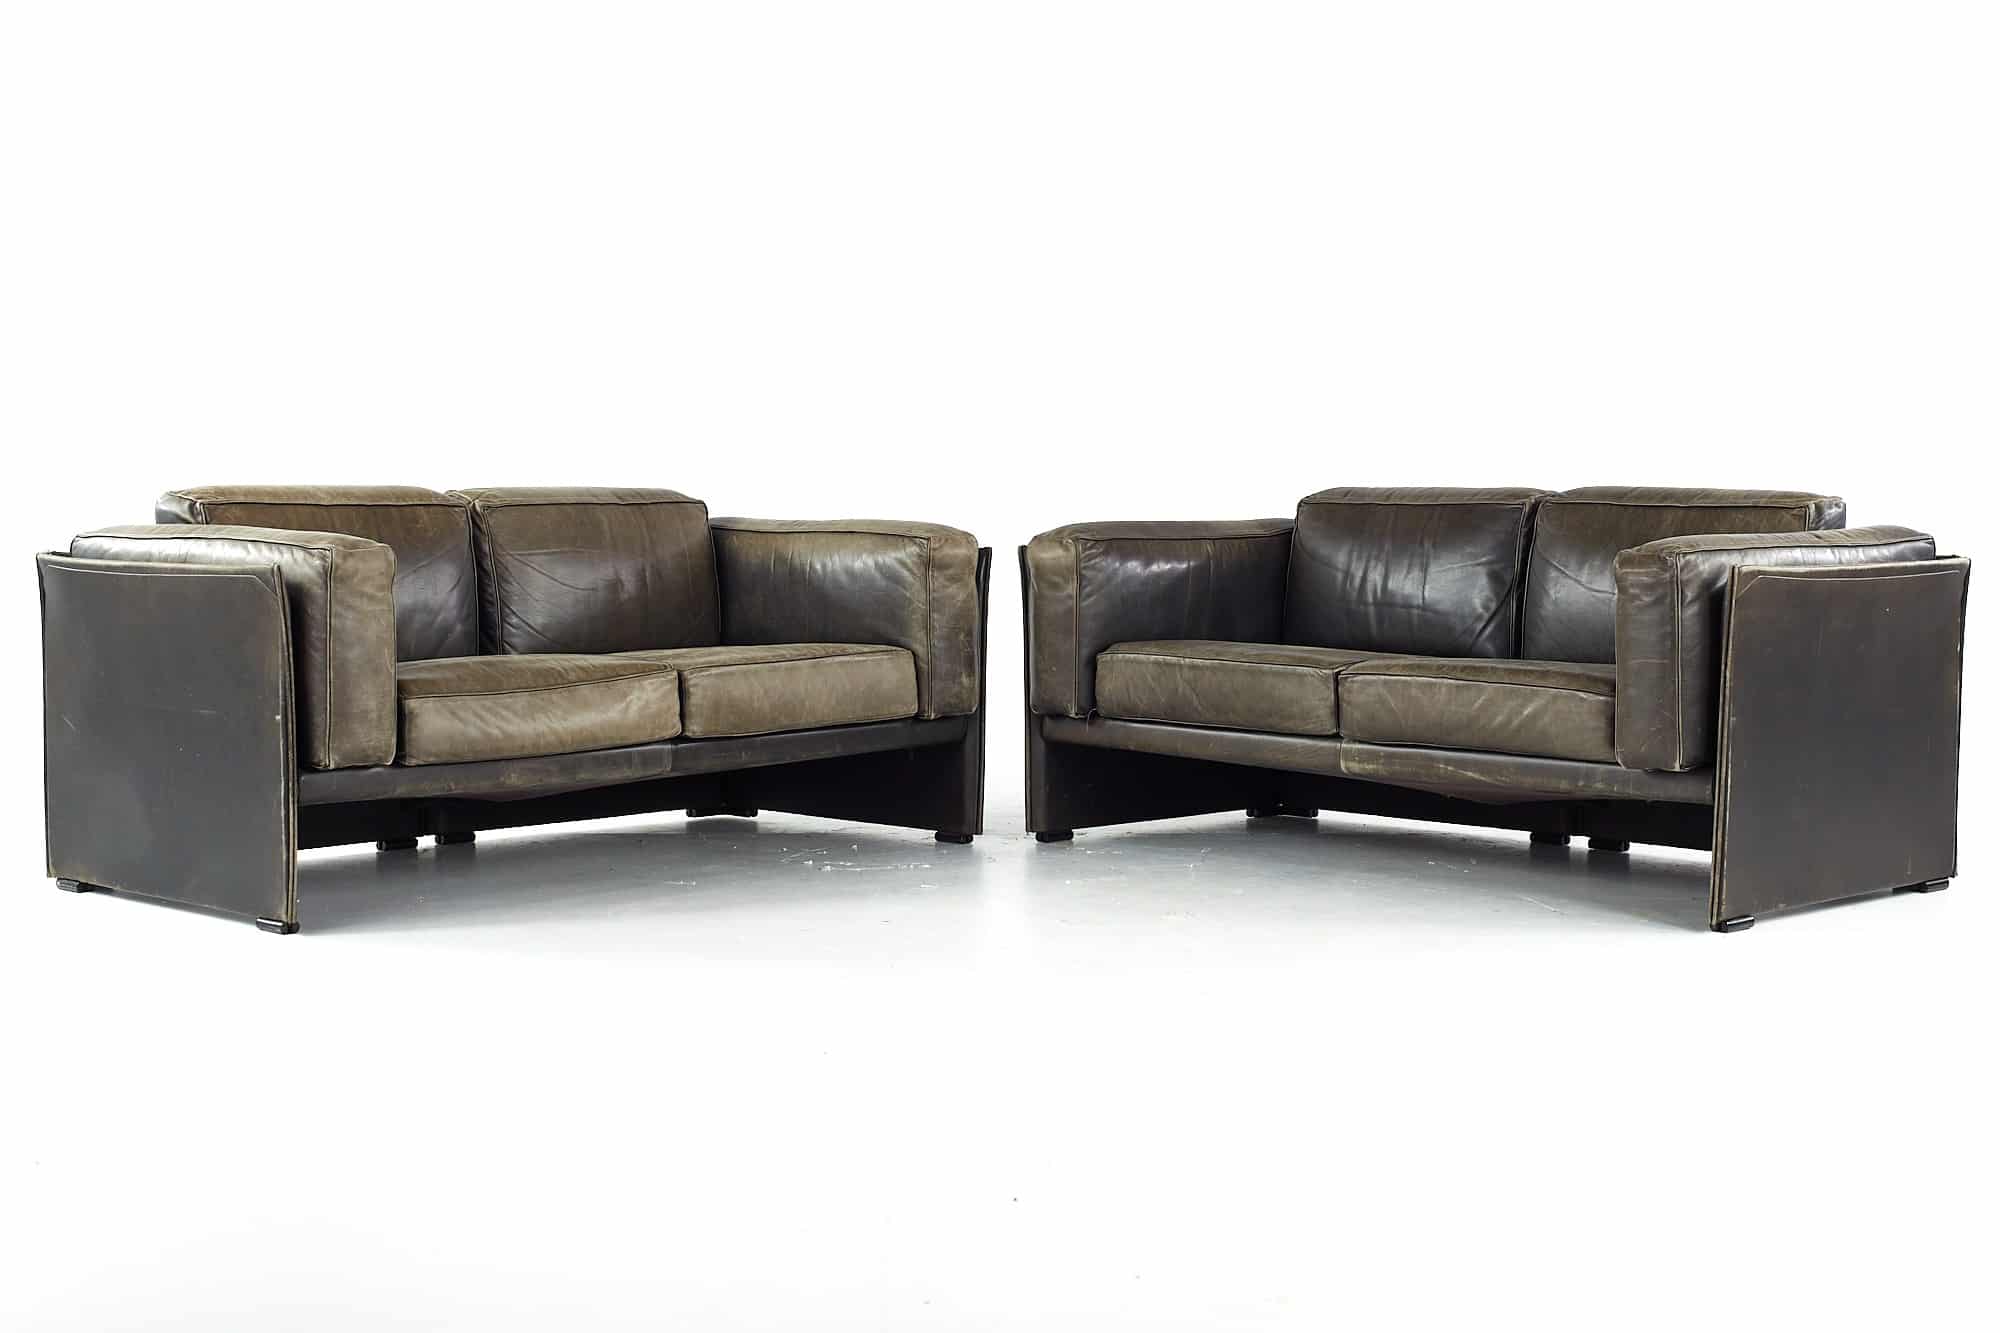 Afra and Tobia Scarpa for Cassina Mid Century Italian Leather Sofas - Pair